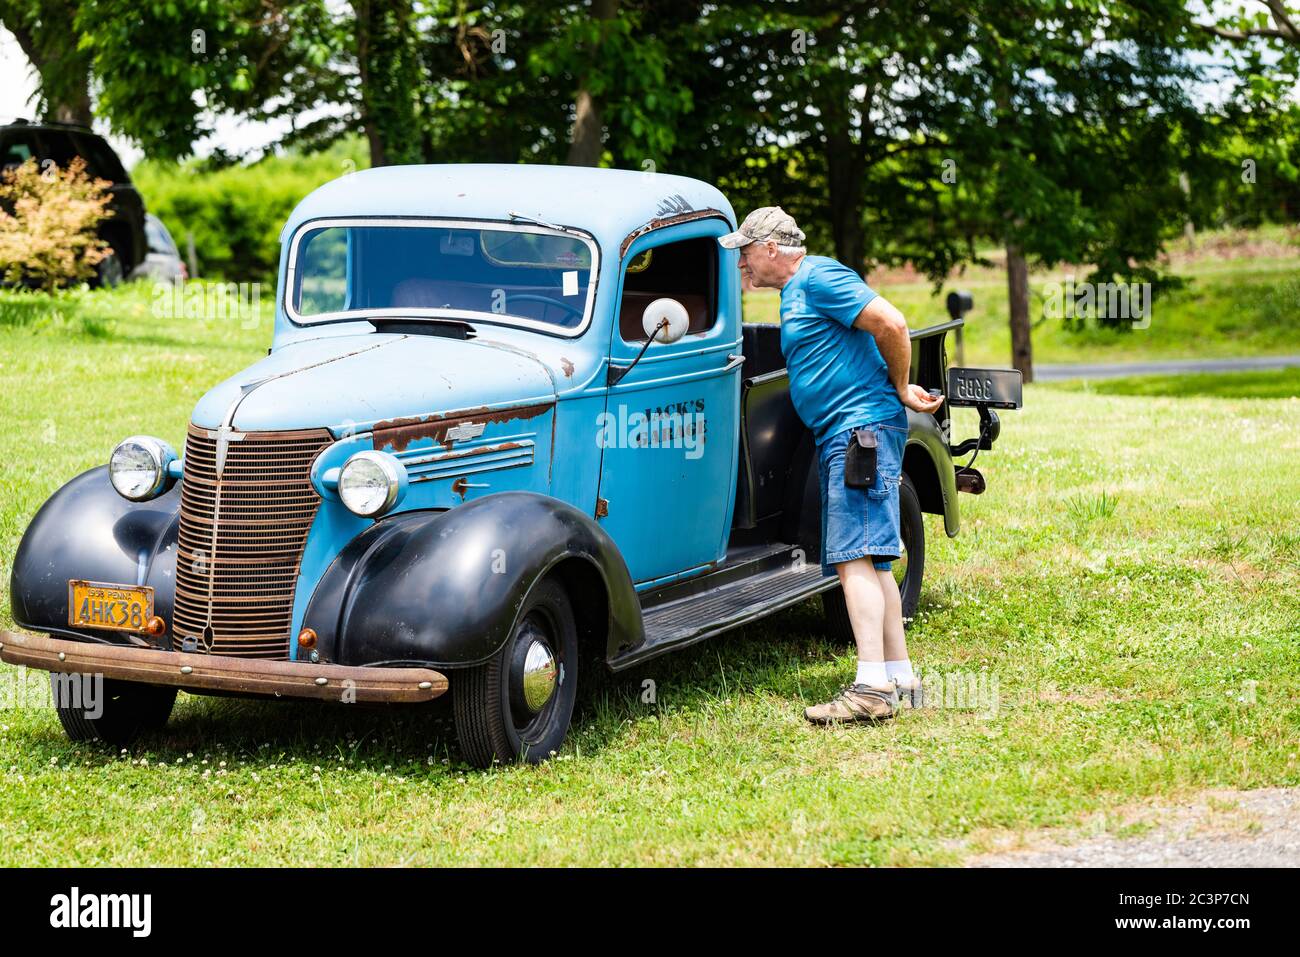 Media, PA / USA. Around one hundred vintage and antique vehicles were on display for the Linvilla Orchards Antique Car Show, with vehicles judged by the Historical Car Cub of Pennsylvania. June 21 2020. Credit: Christopher Evens Stock Photo